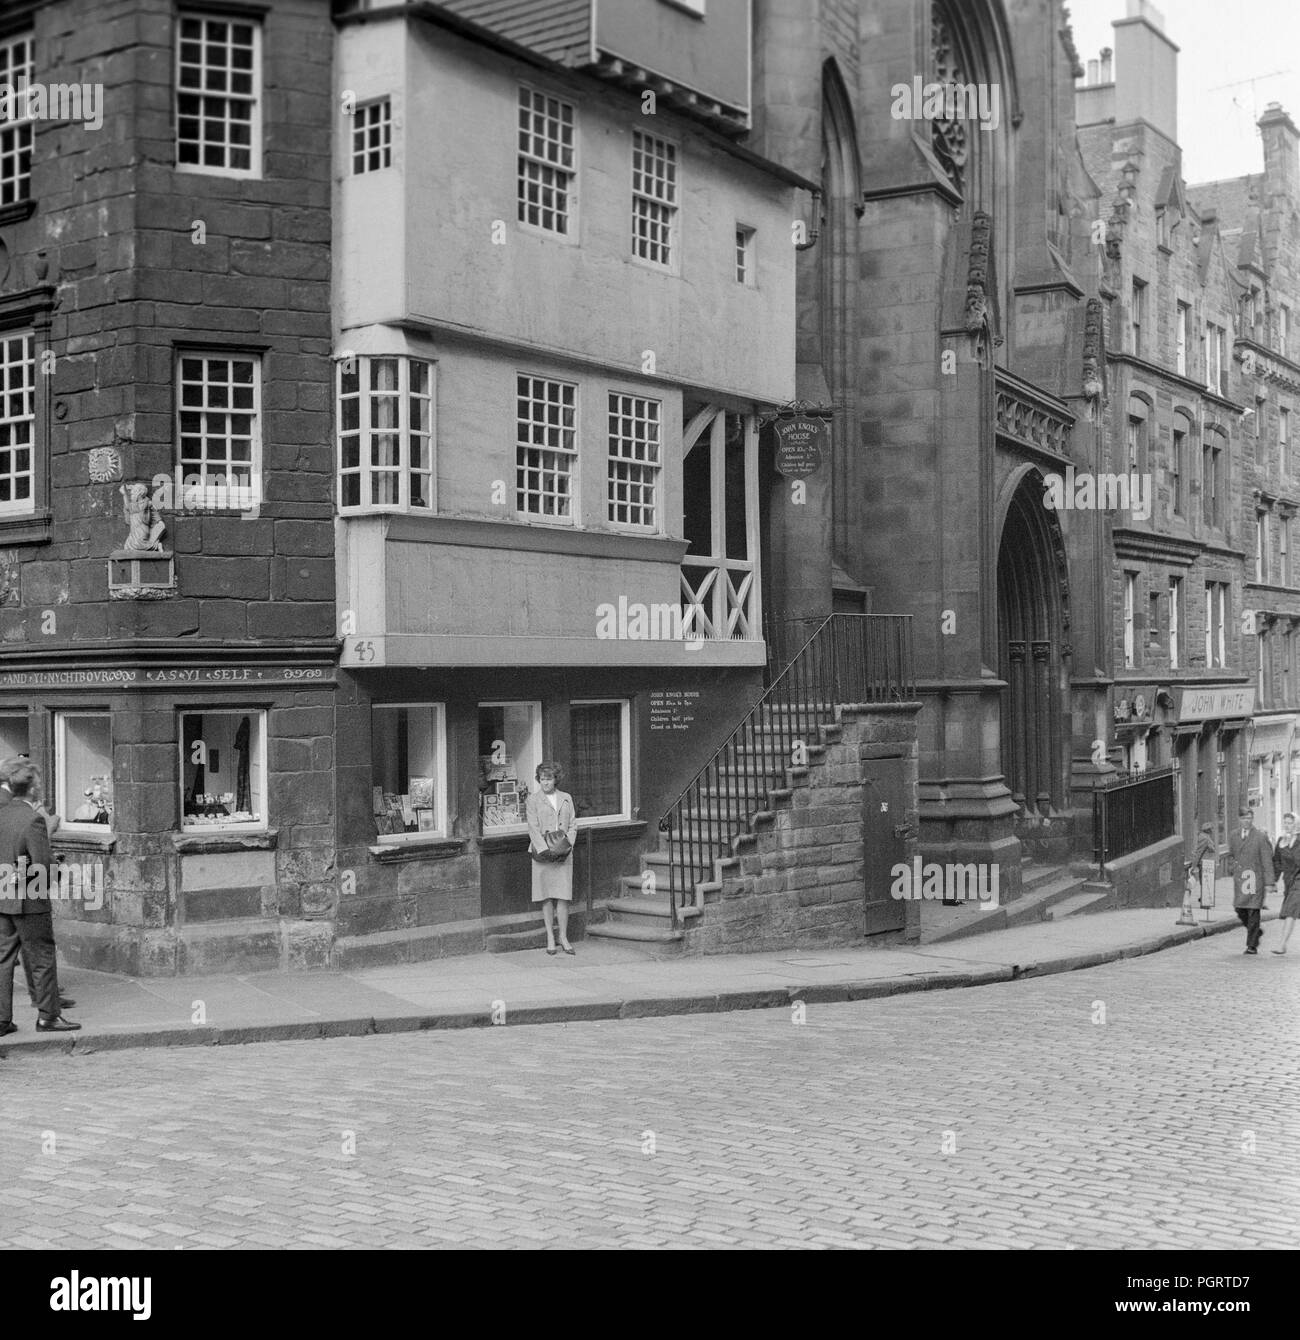 A view of Edinburgh in Scotland showing John Knox's house, taken in the early 1960s. Stock Photo